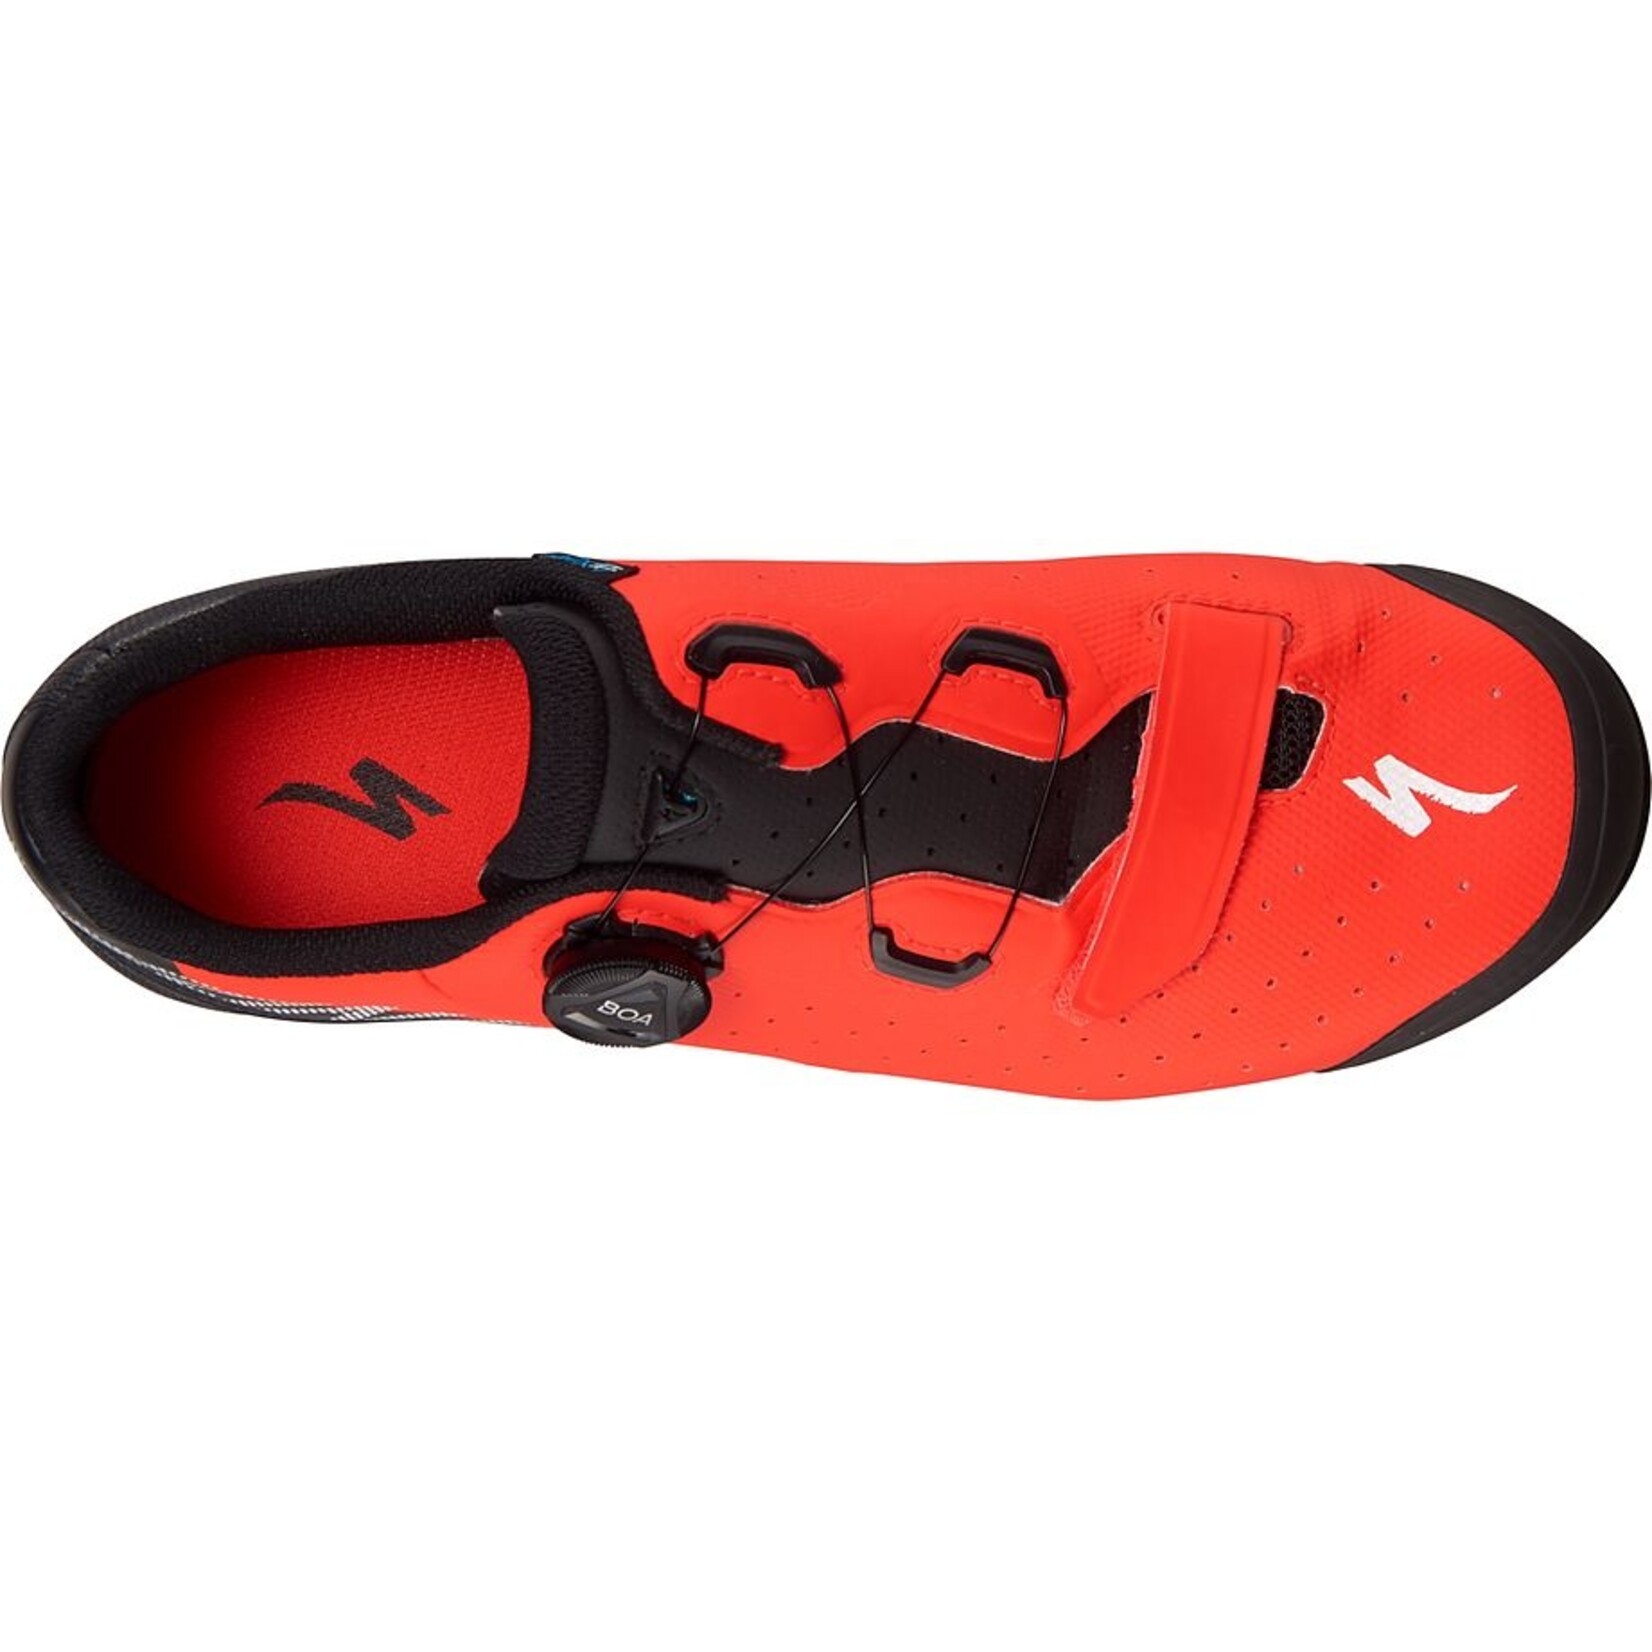 Specialized Recon 2.0 Mountain Bike Shoes in Rocket Red